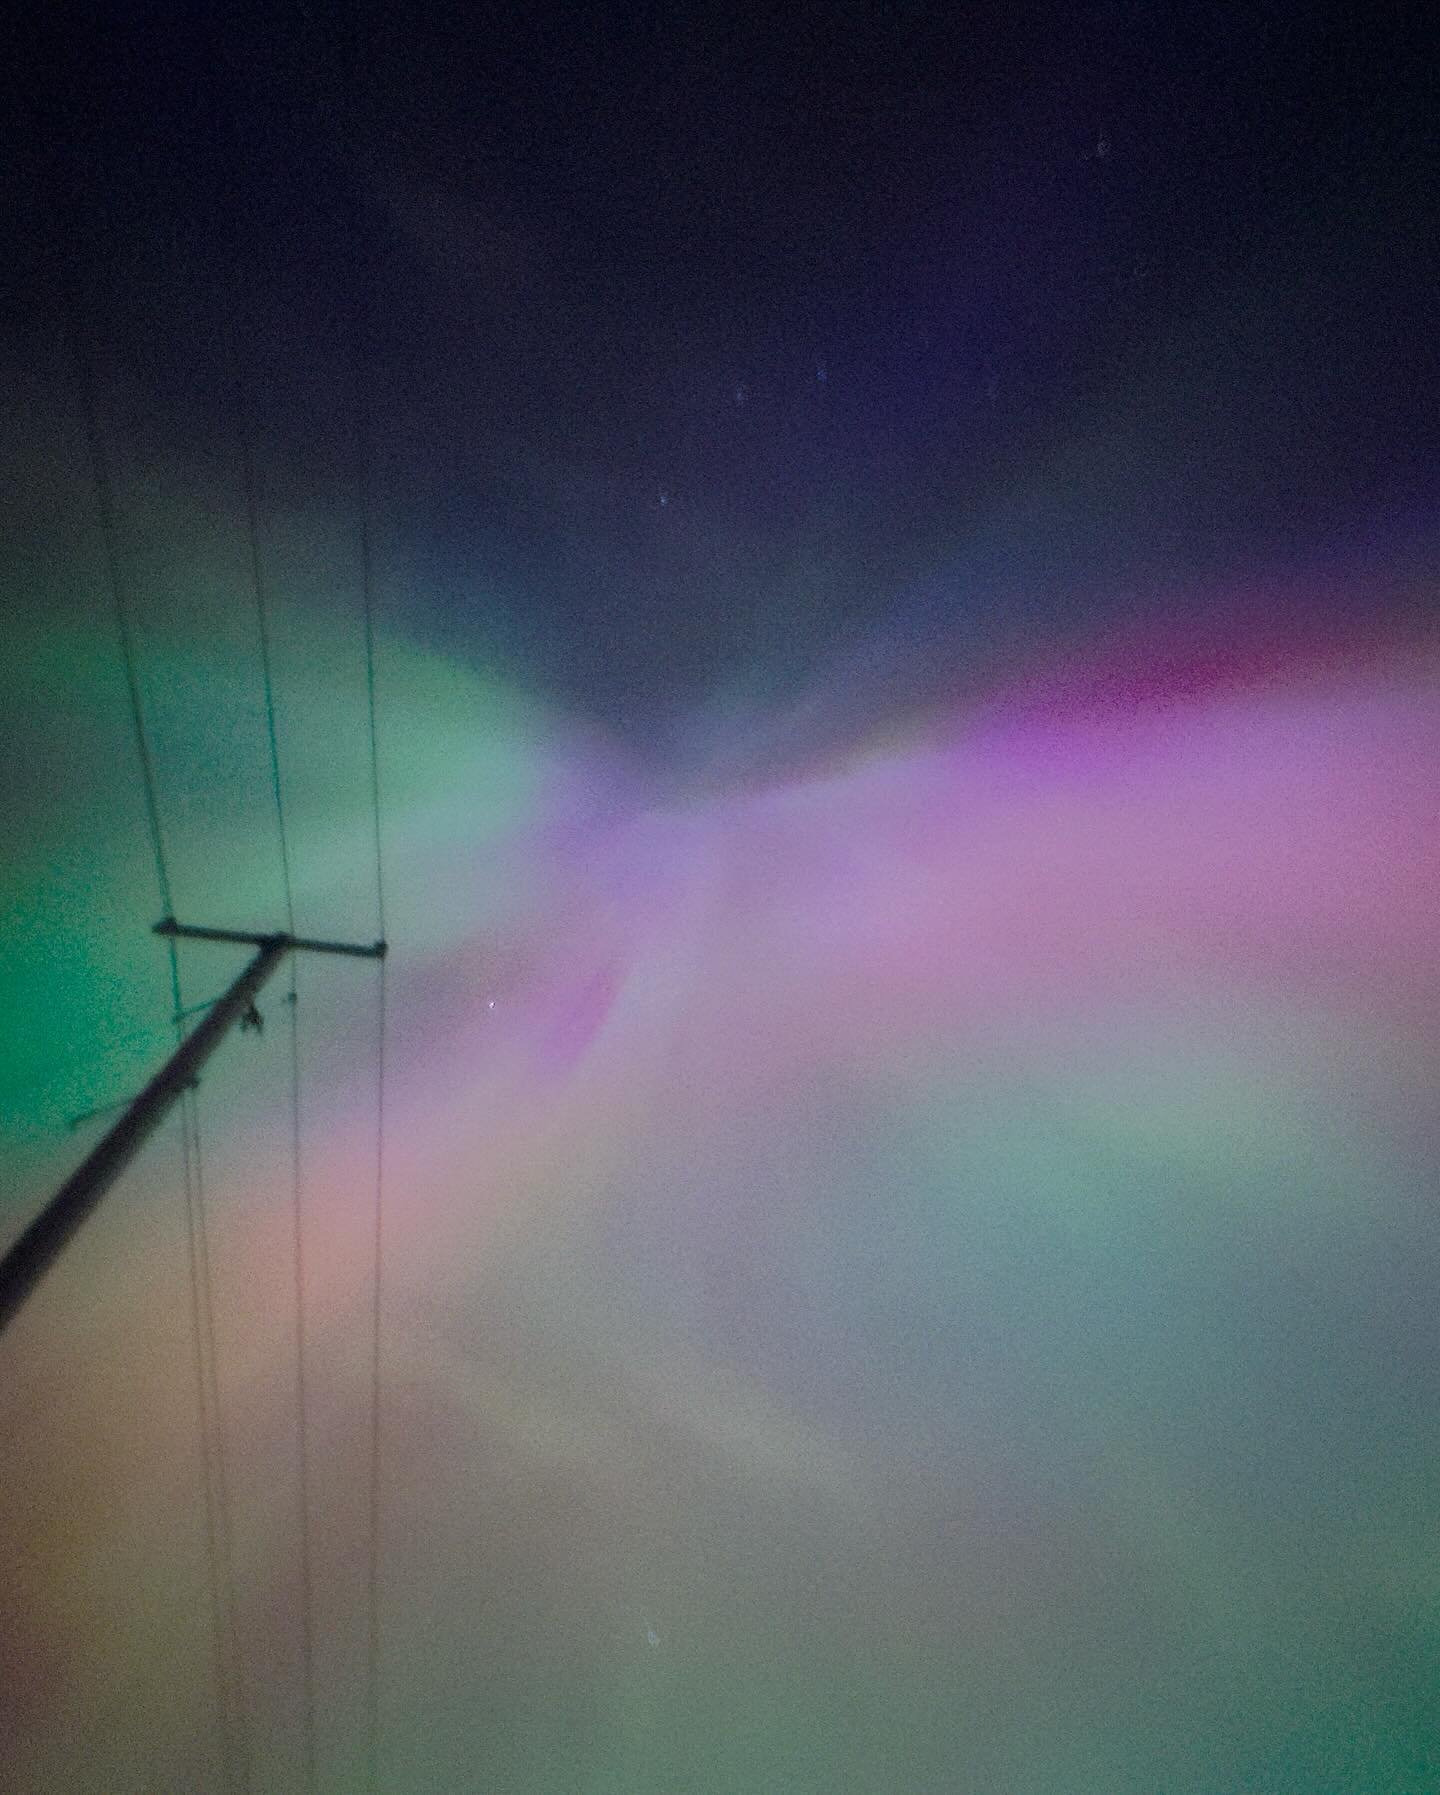 Well played Mother Nature. Aurora Borealis for the win. #naturemakesthebestart